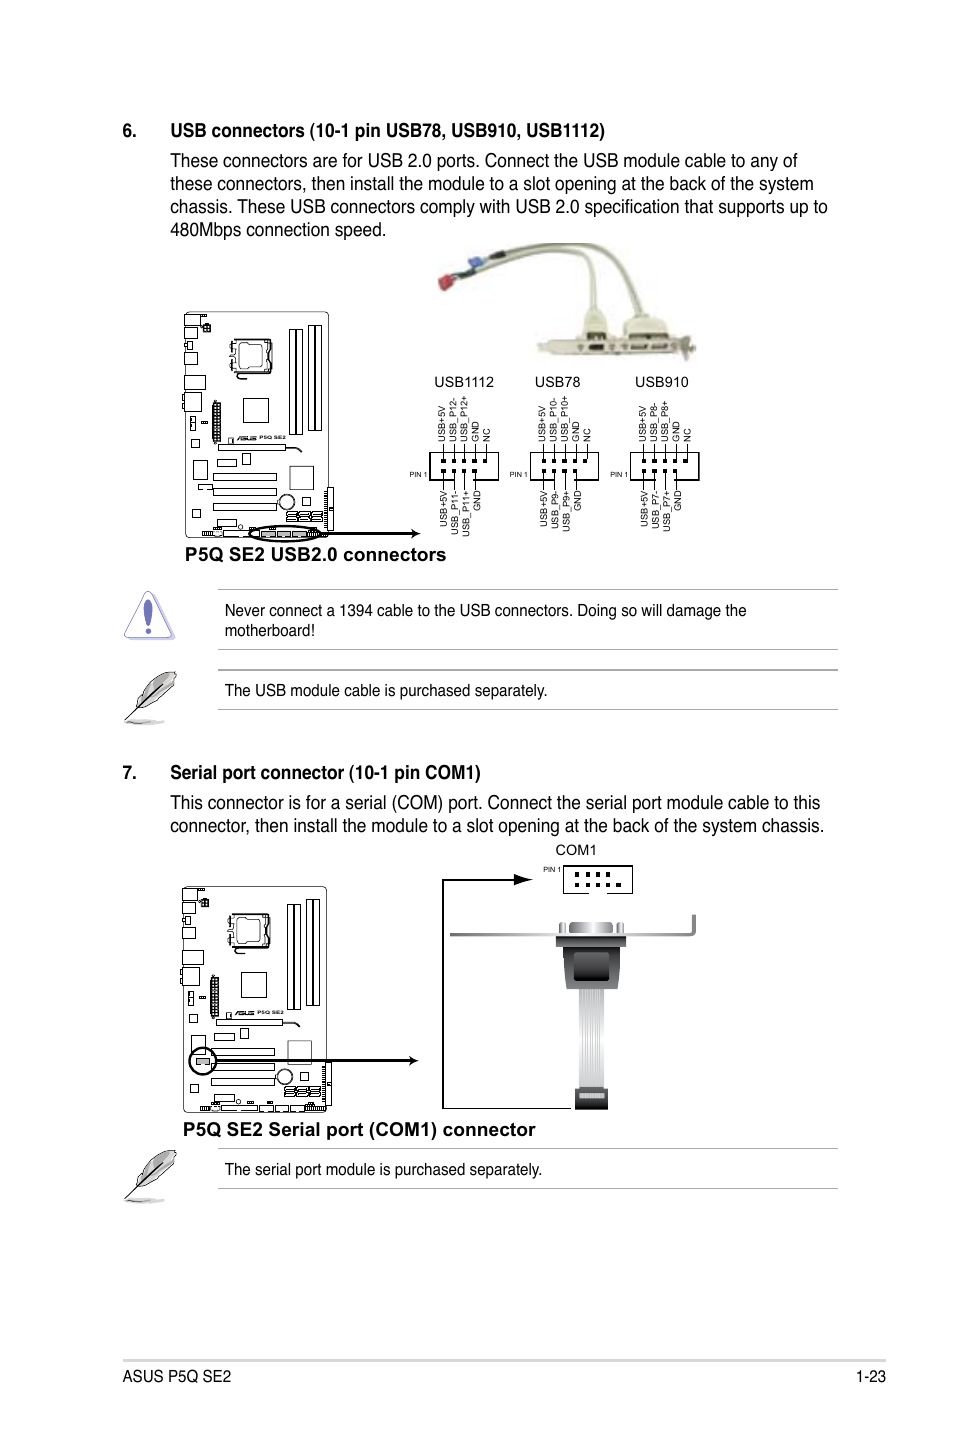 P5q se2 usb2.0 connectors, P5q se2 serial port (com1) connector, The serial  port module is purchased separately | Asus P5Q SE2 User Manual | Page 33 /  64